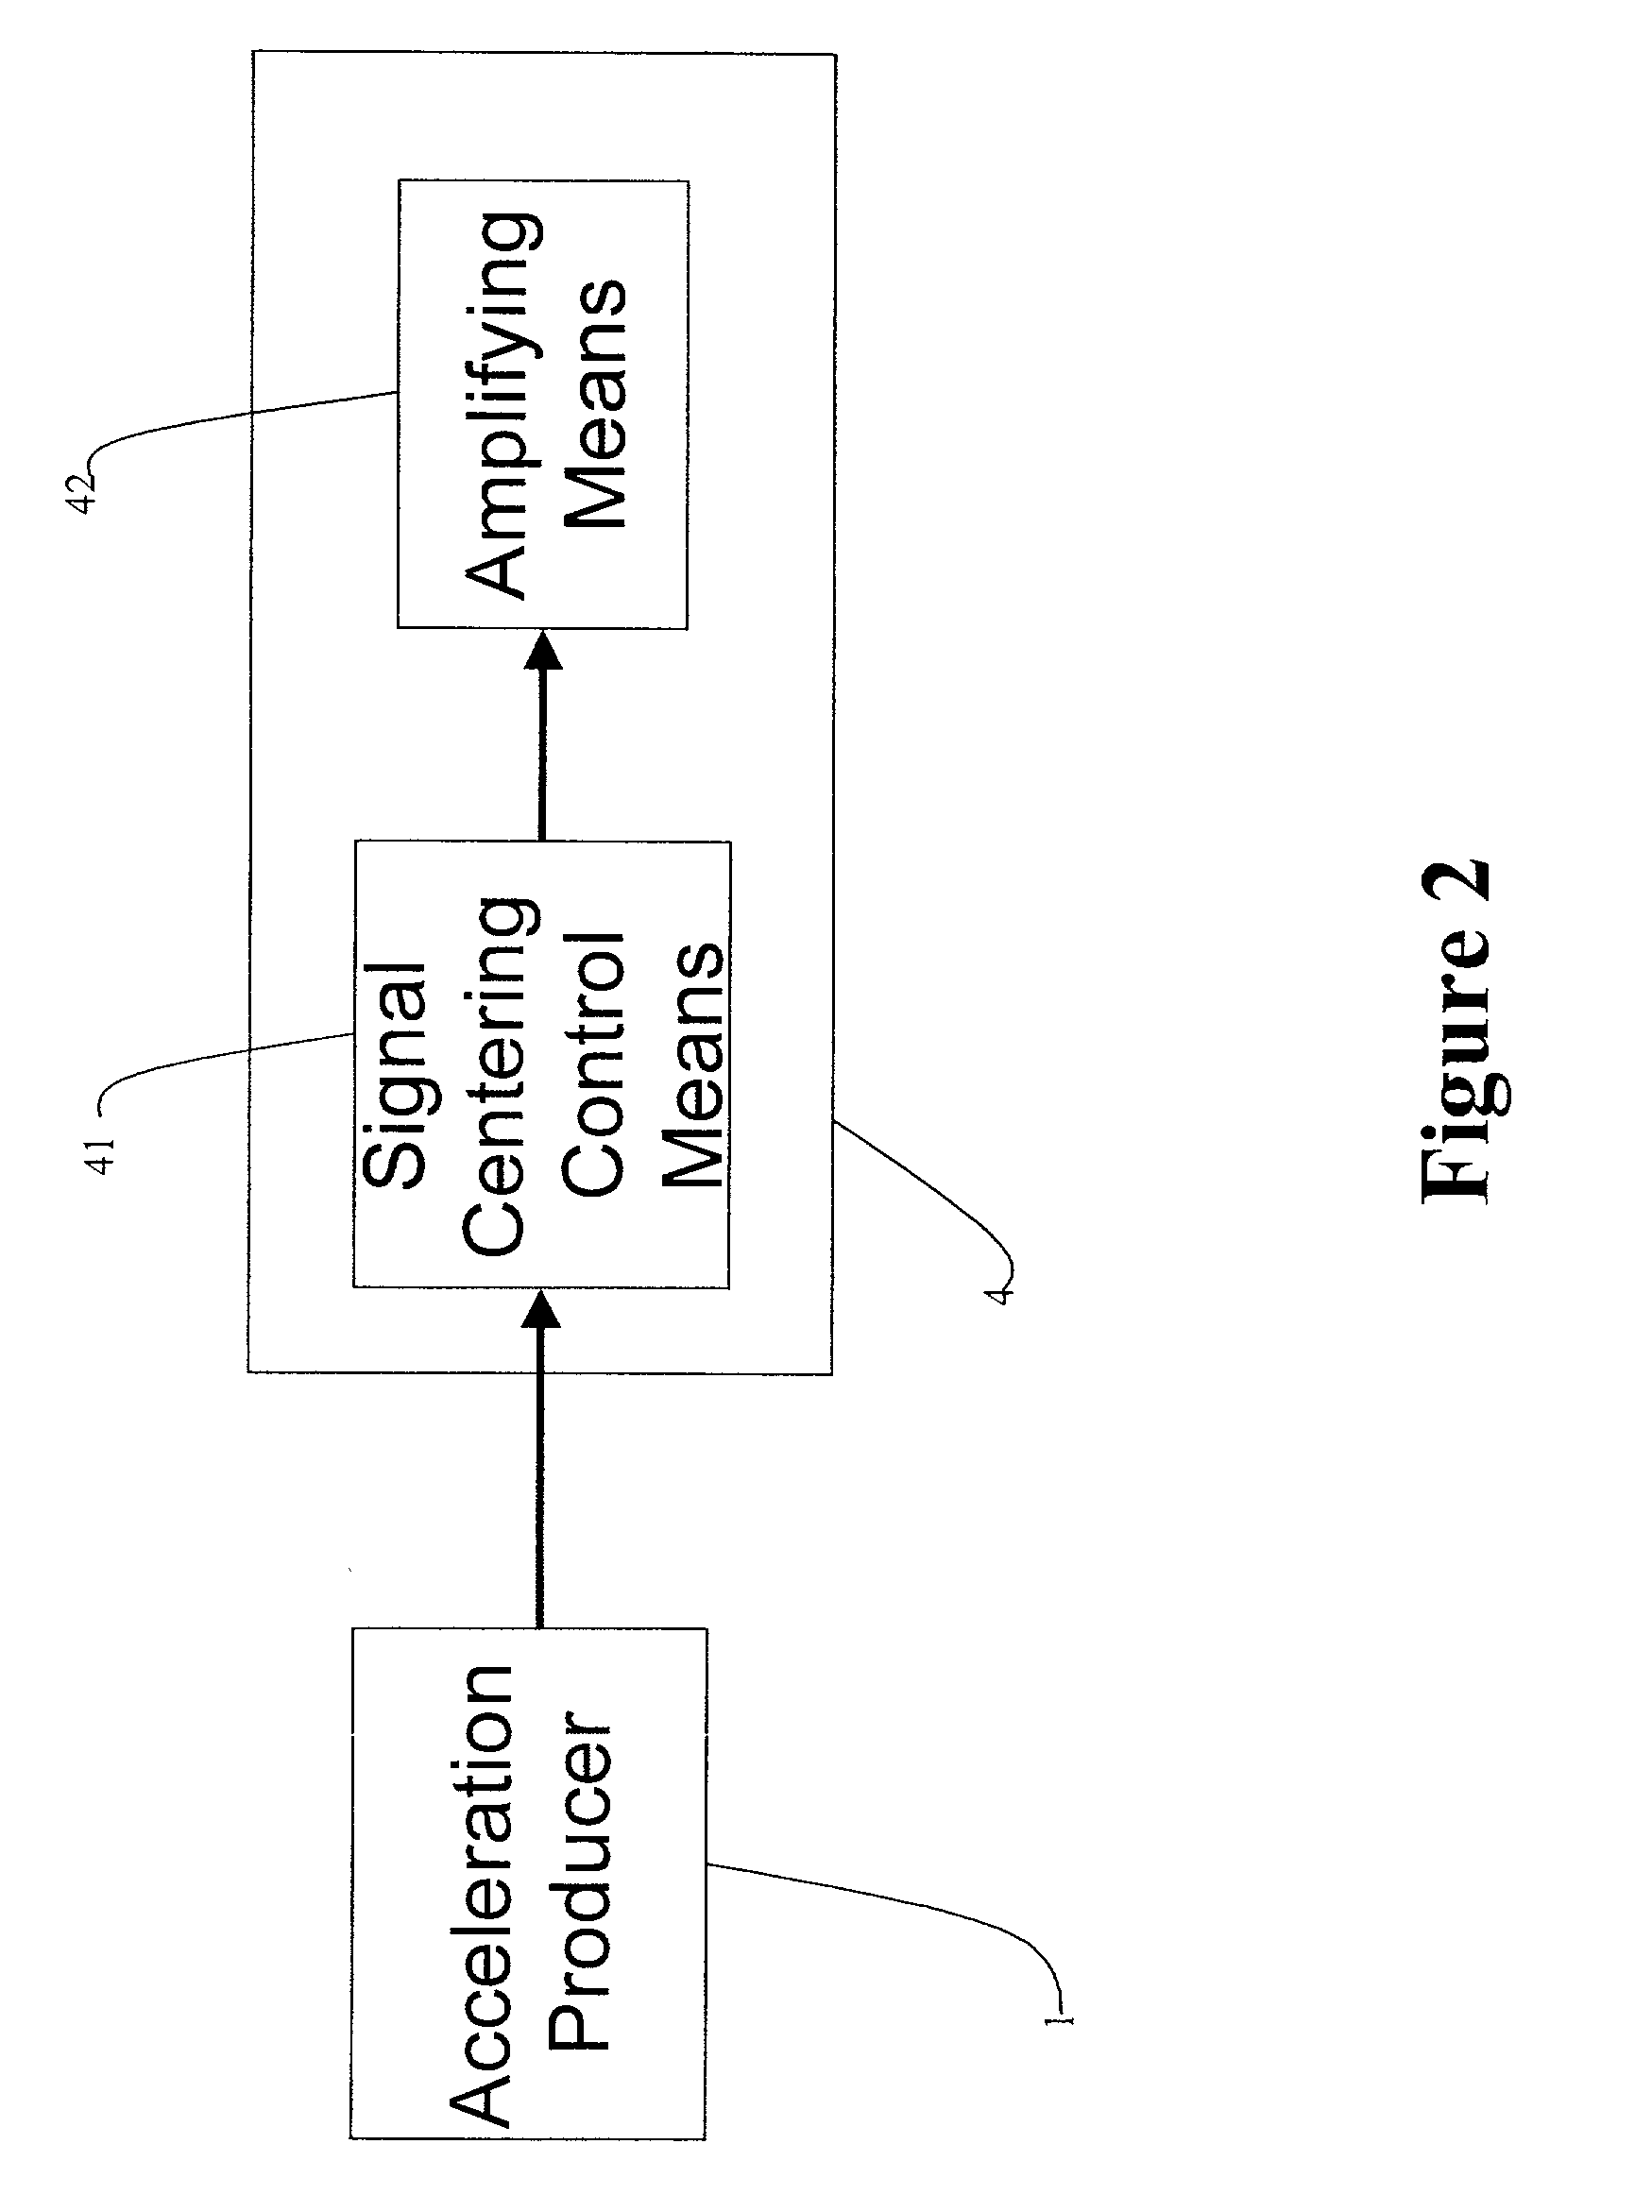 Acceleration signal amplifier with signal centering control technology